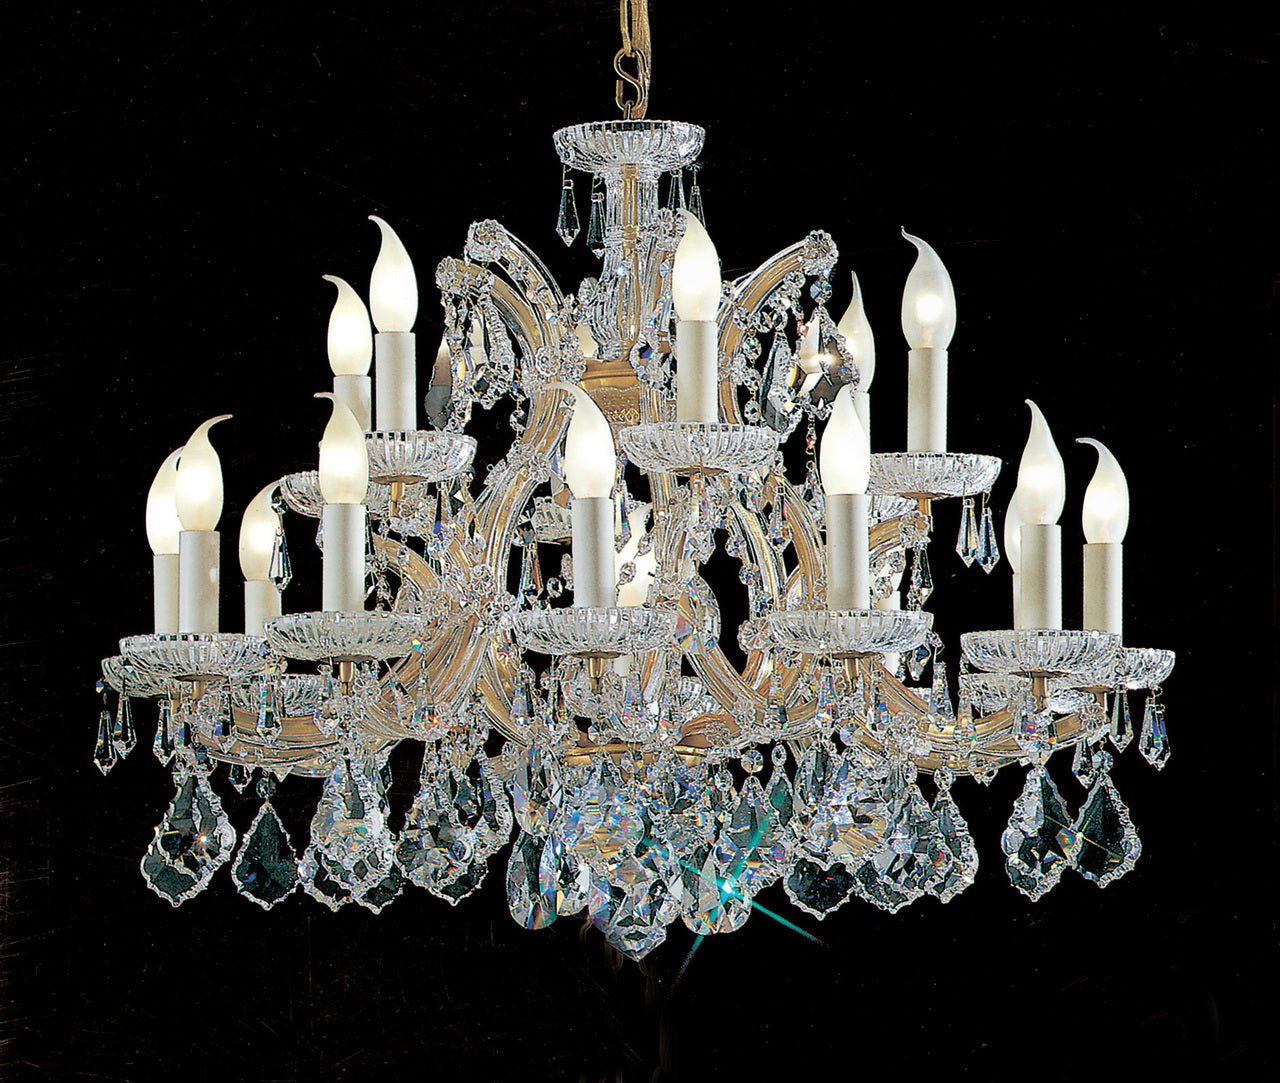 Classic Lighting 8116 OWG C Maria Theresa Traditional Crystal Chandelier in Olde World Gold (Imported from Italy)